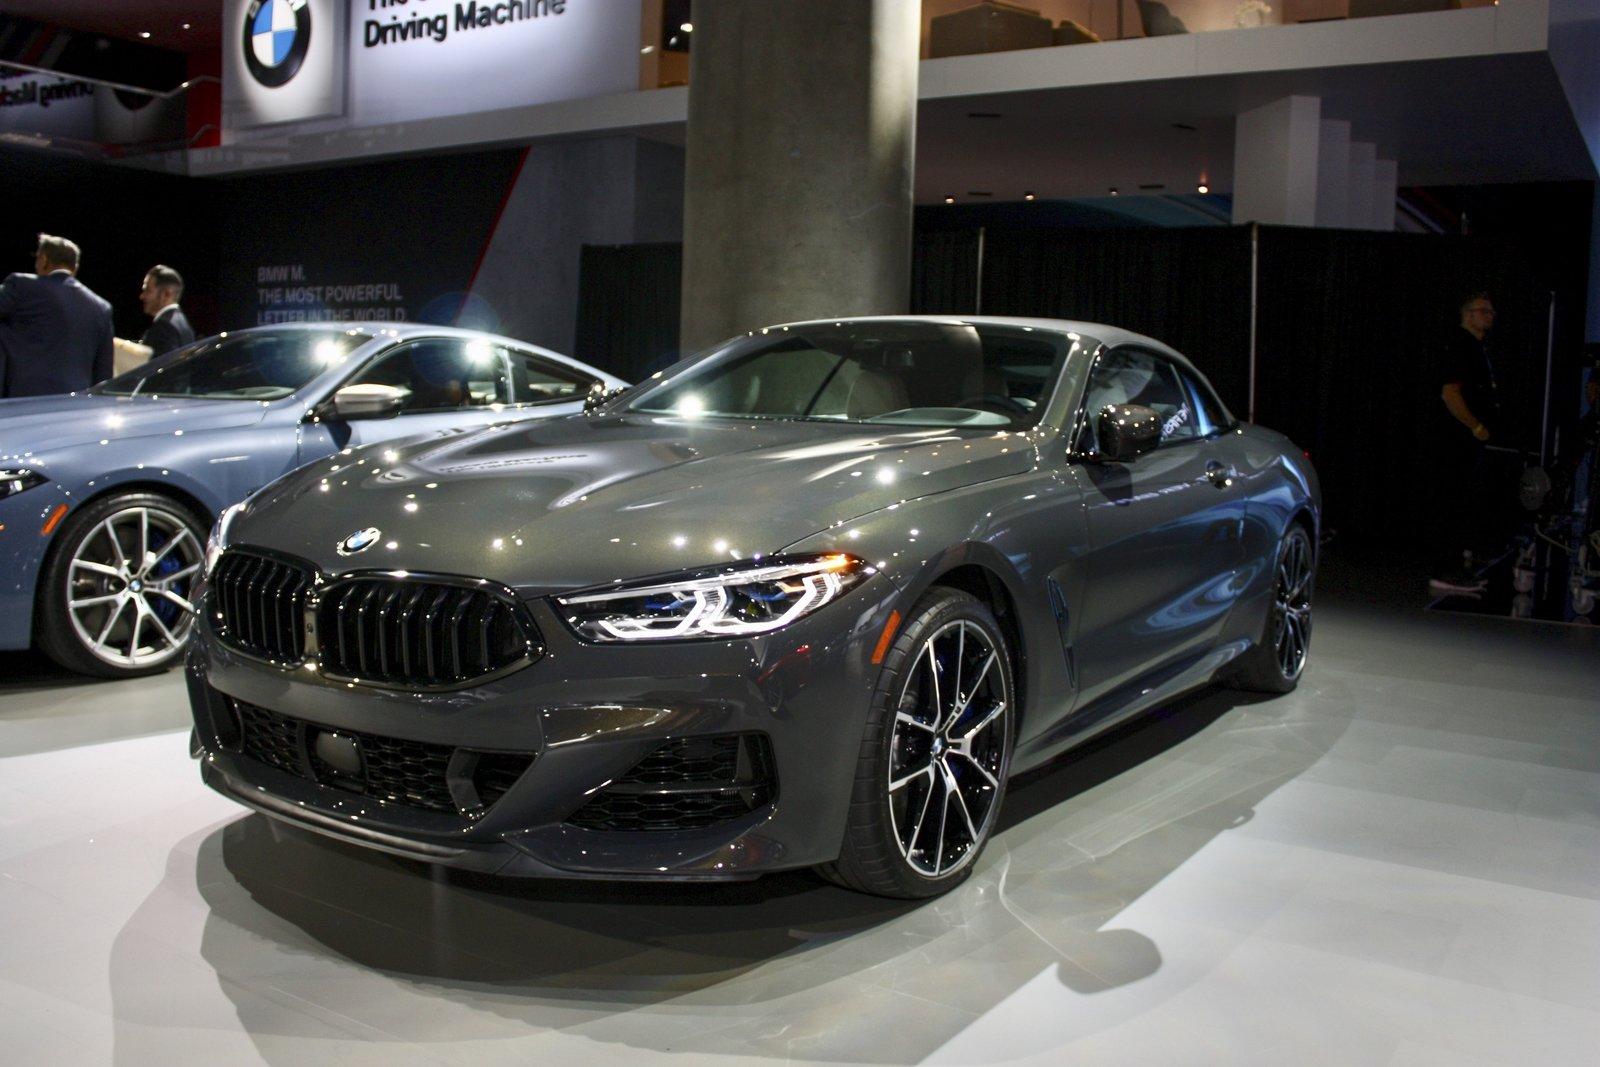 BMW 8 Series Convertible Picture, Photo, Wallpaper